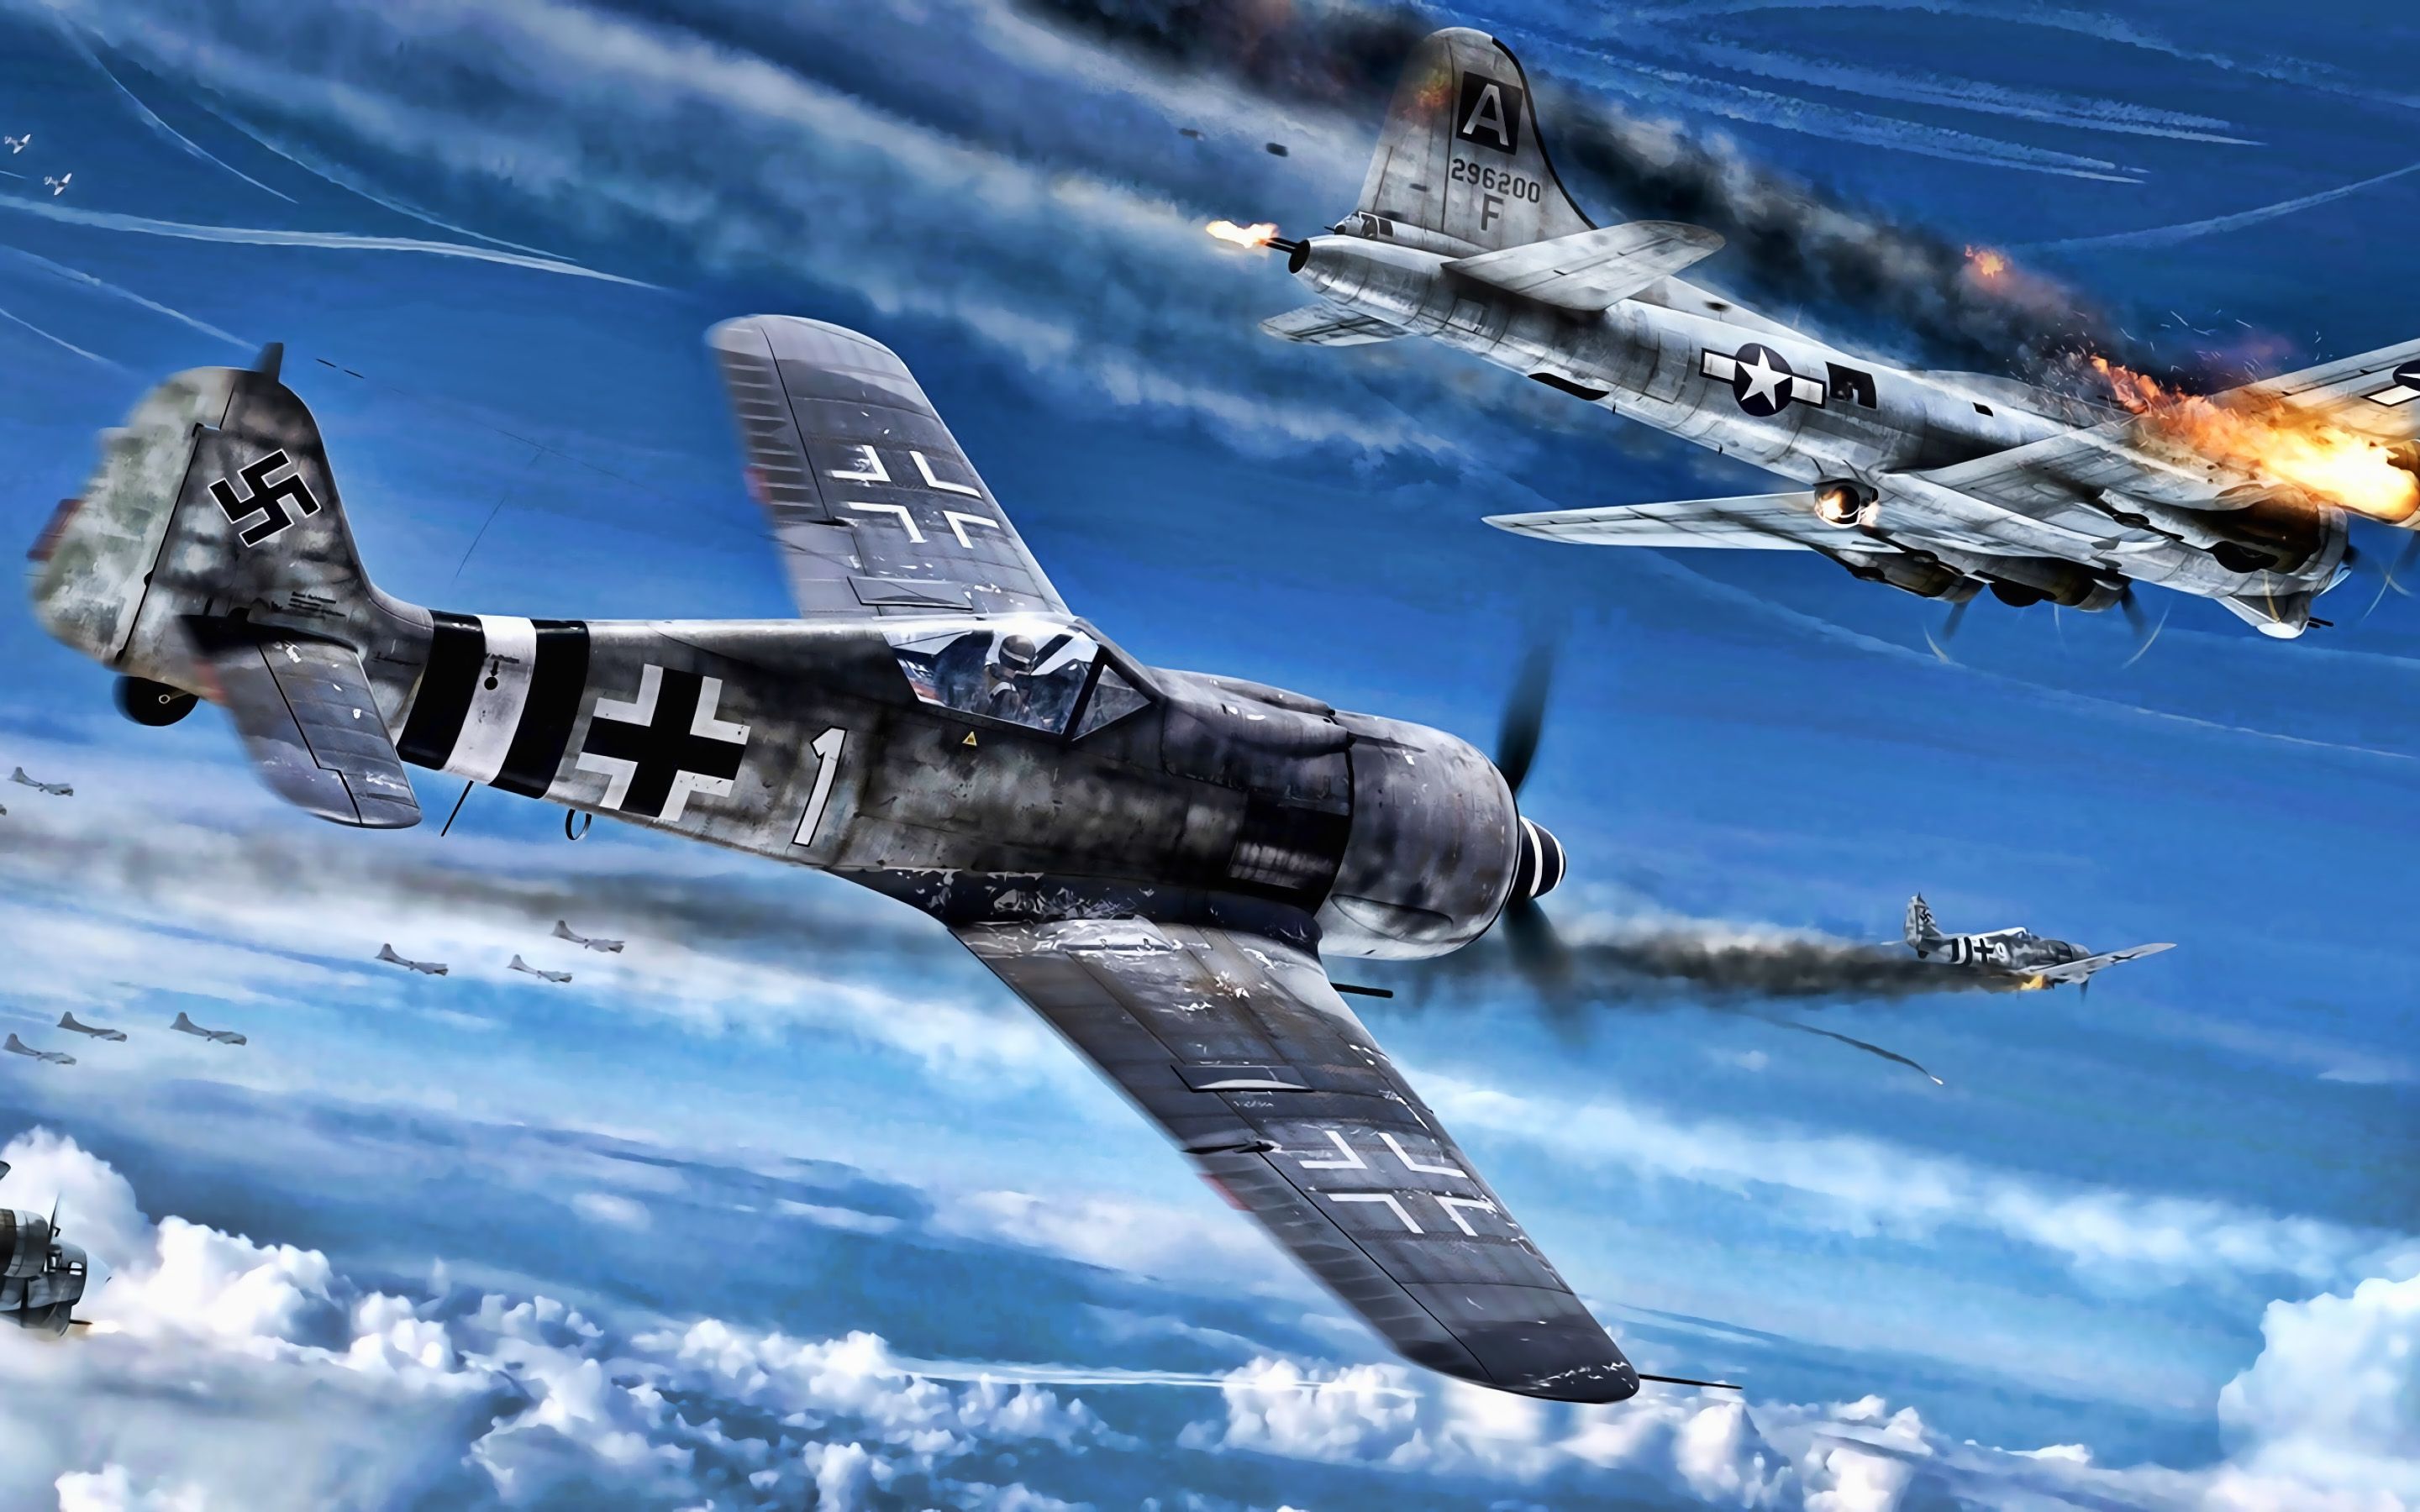 Download Wallpaper Focke Wulf Fw Boeing B 17 Flying Fortress, Battle, Luftwaffe Vs US Air Force, World War II, Fighter Vs Bomber For Desktop With Resolution 2880x1800. High Quality HD Picture Wallpaper